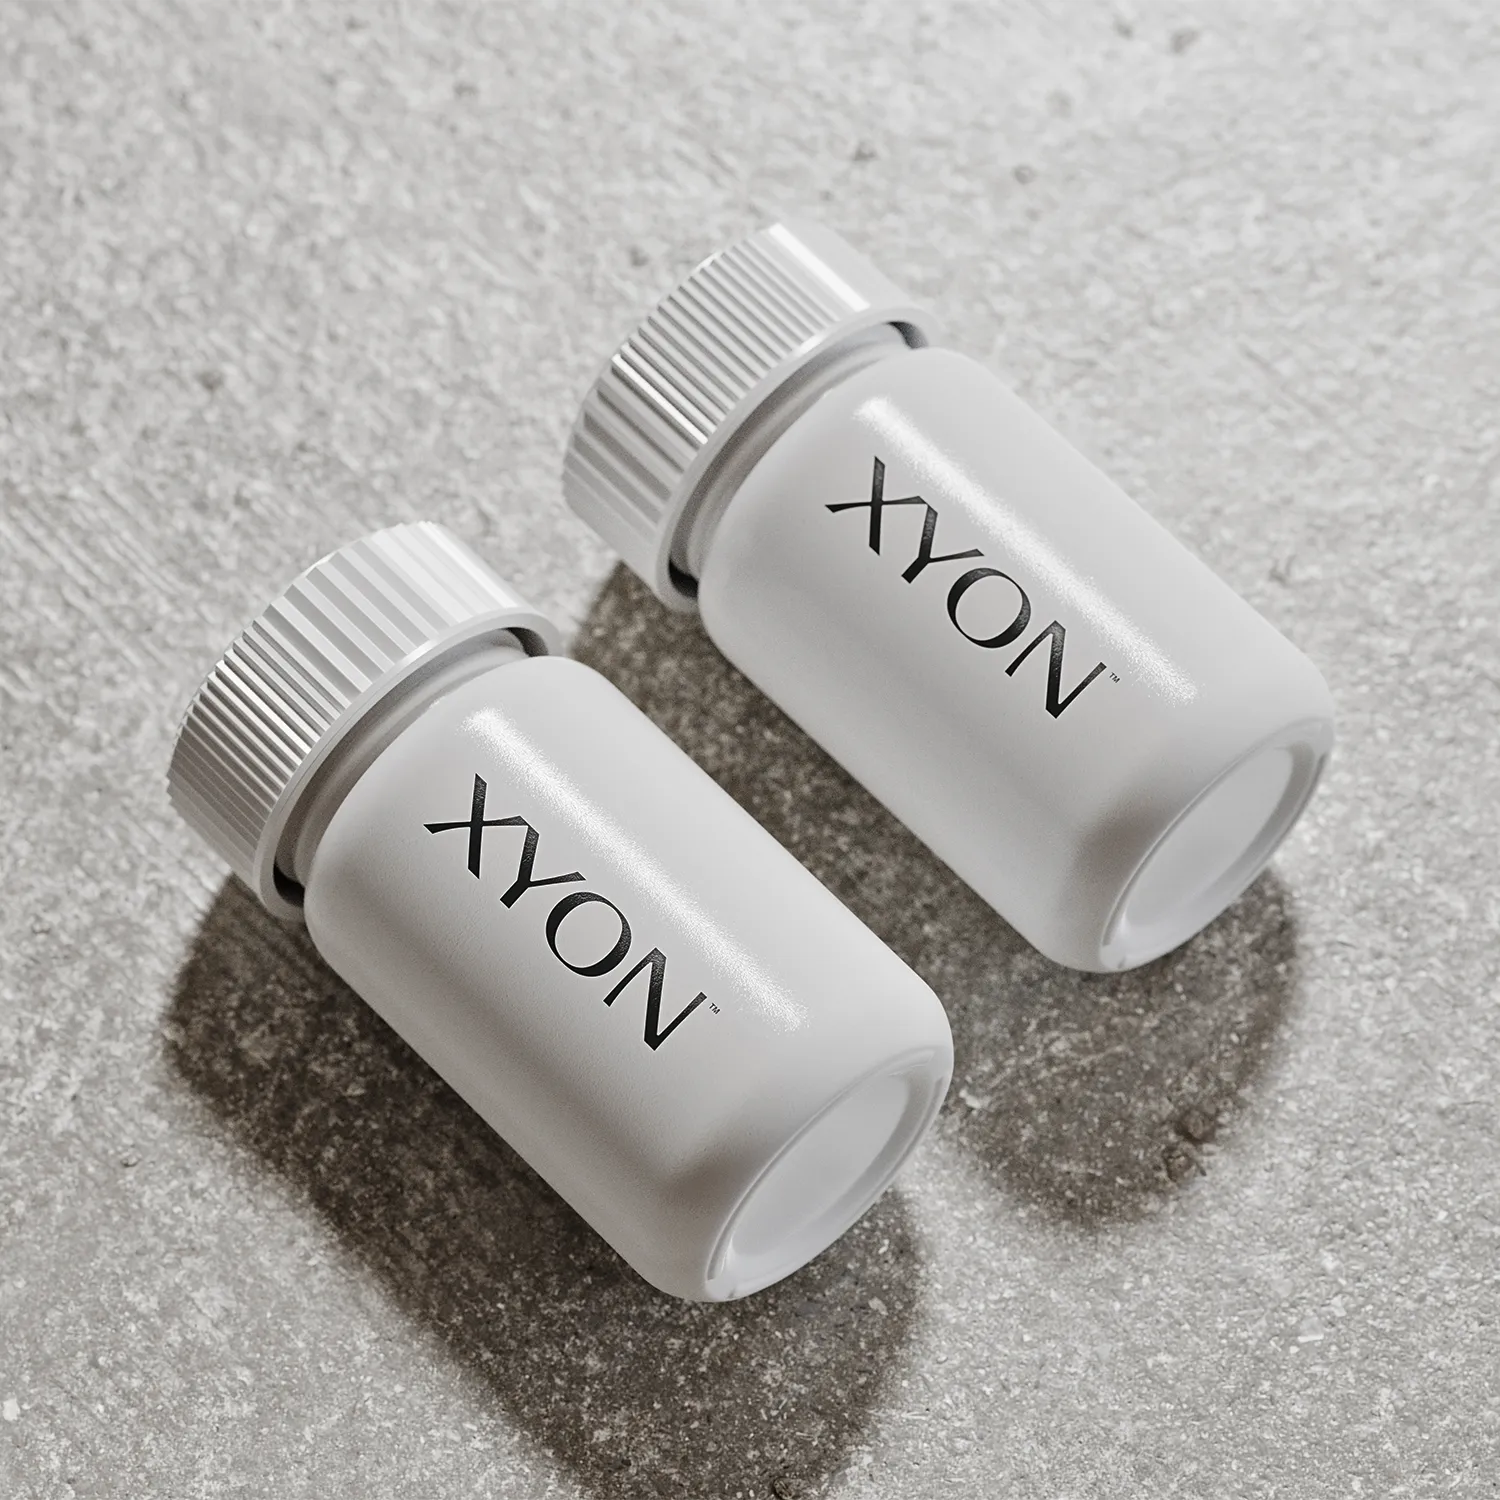 XYON bottle of oral Spironolactone for female hair loss